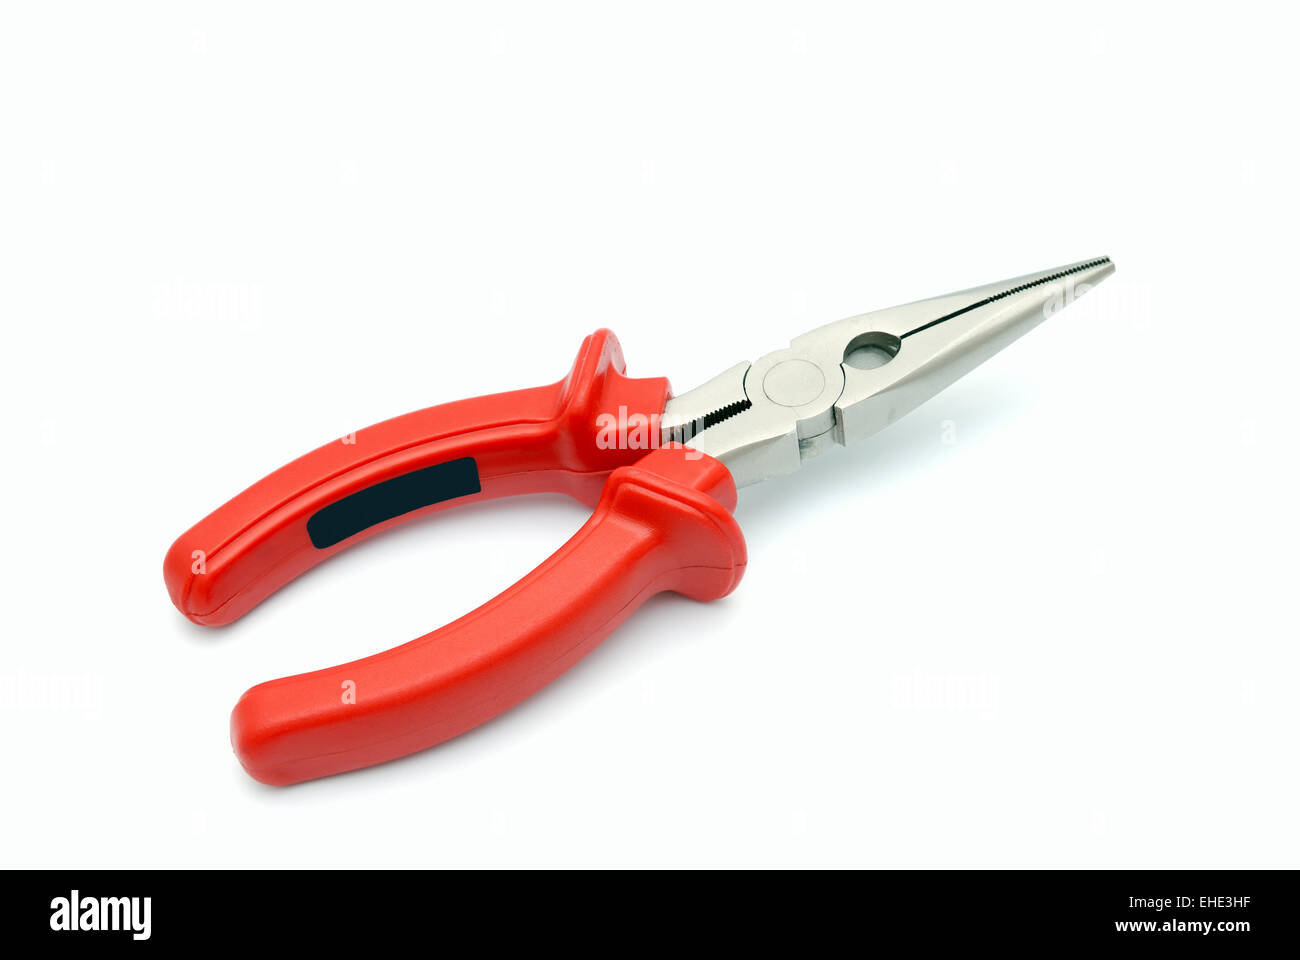 Flat-nose pliers with red handles Stock Photo